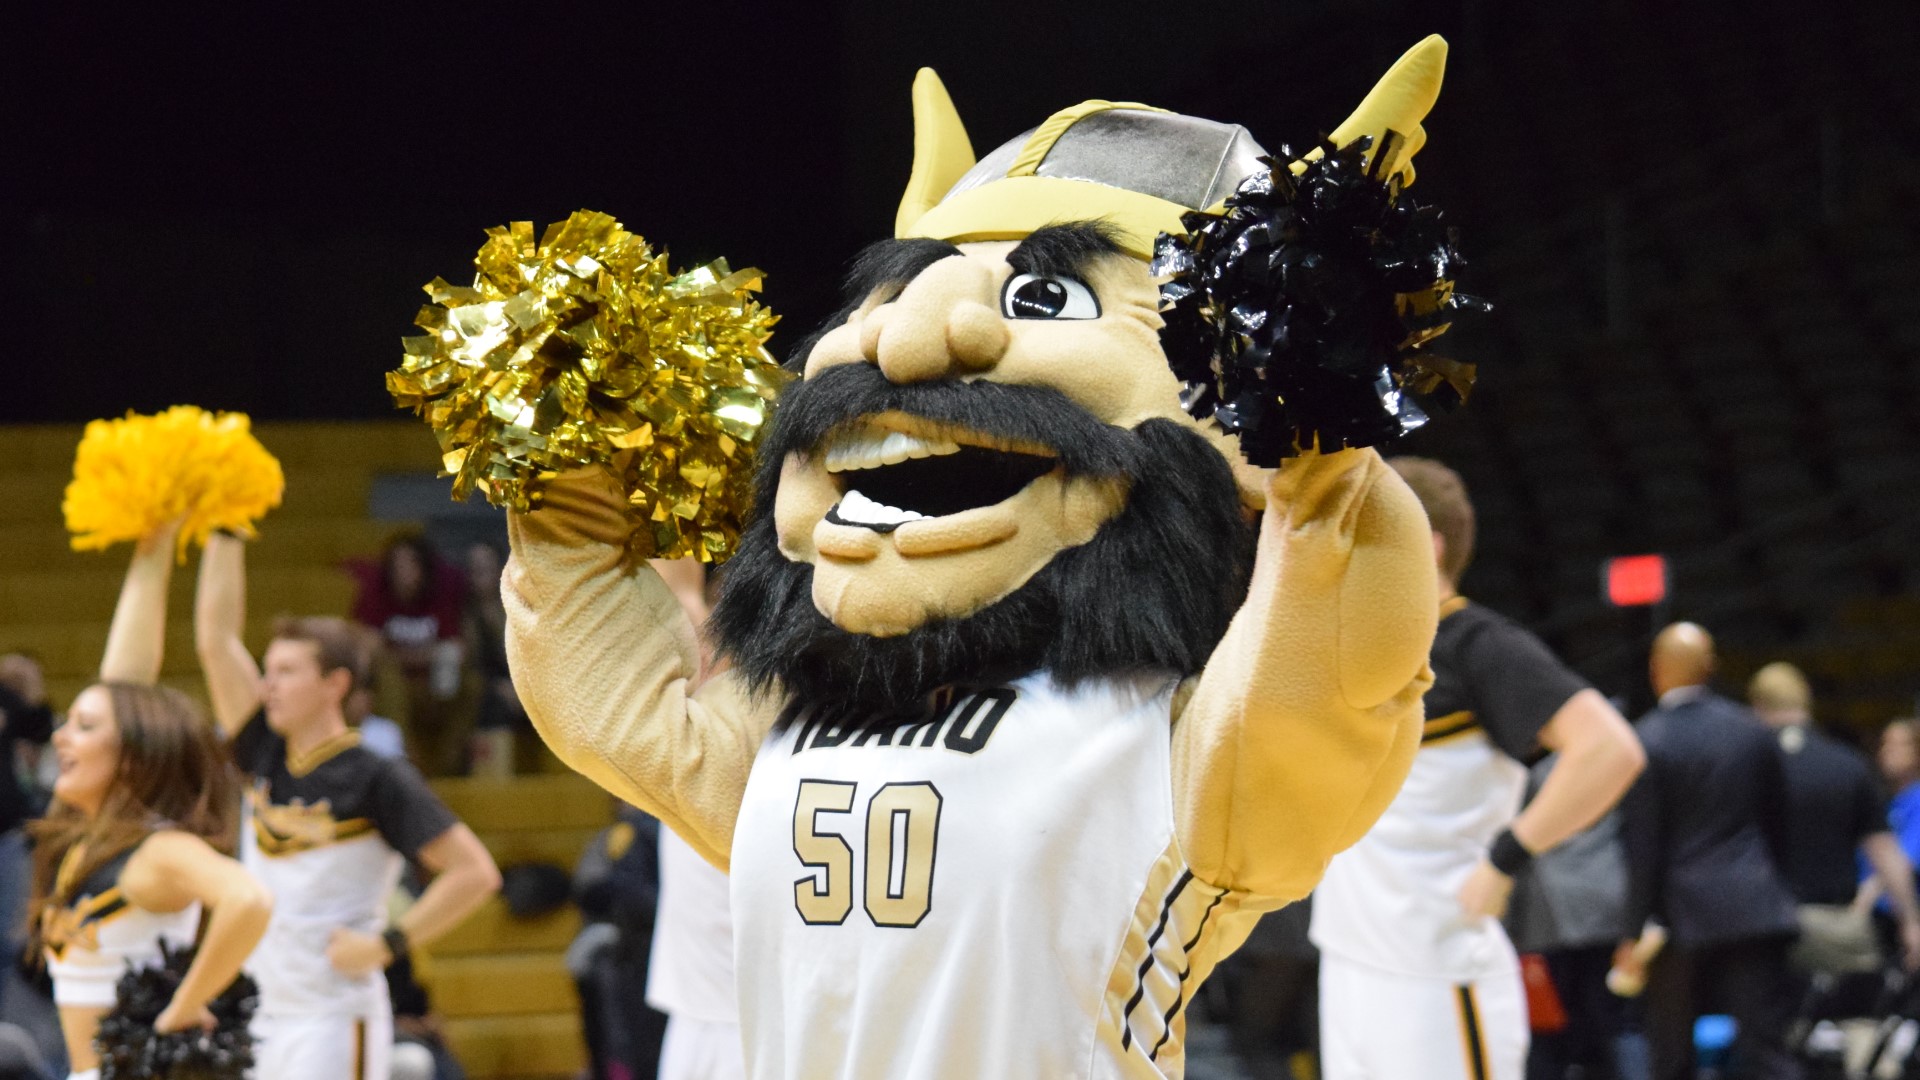 Over the next few weeks, we'll be delving into the history of our local collegiate mascots. First up? The Idaho Vandals.